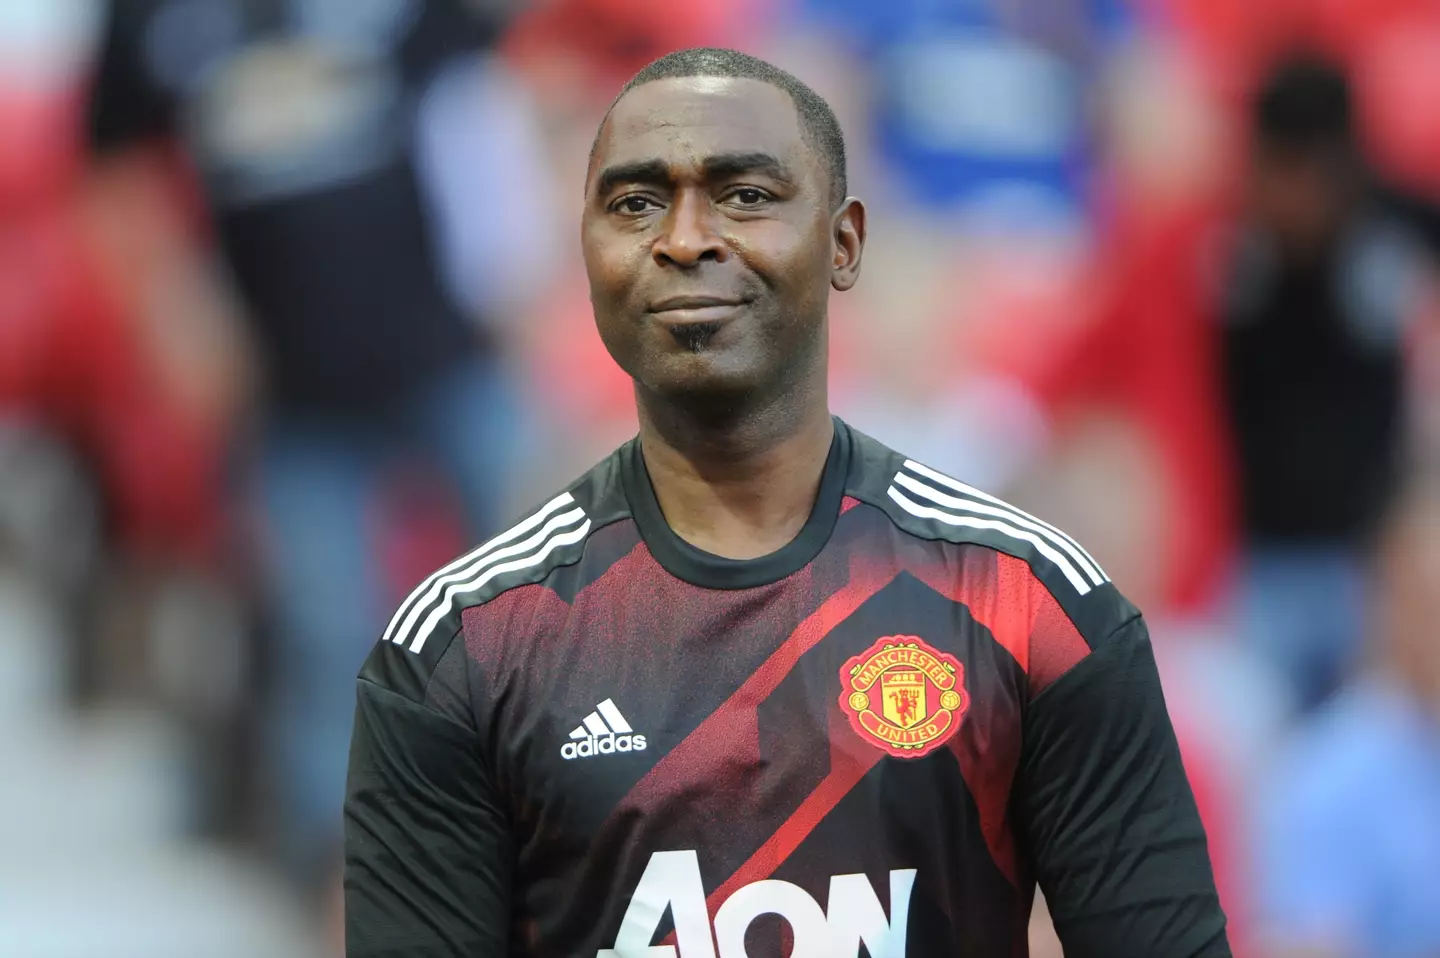 Former Manchester United striker Andy Cole. (